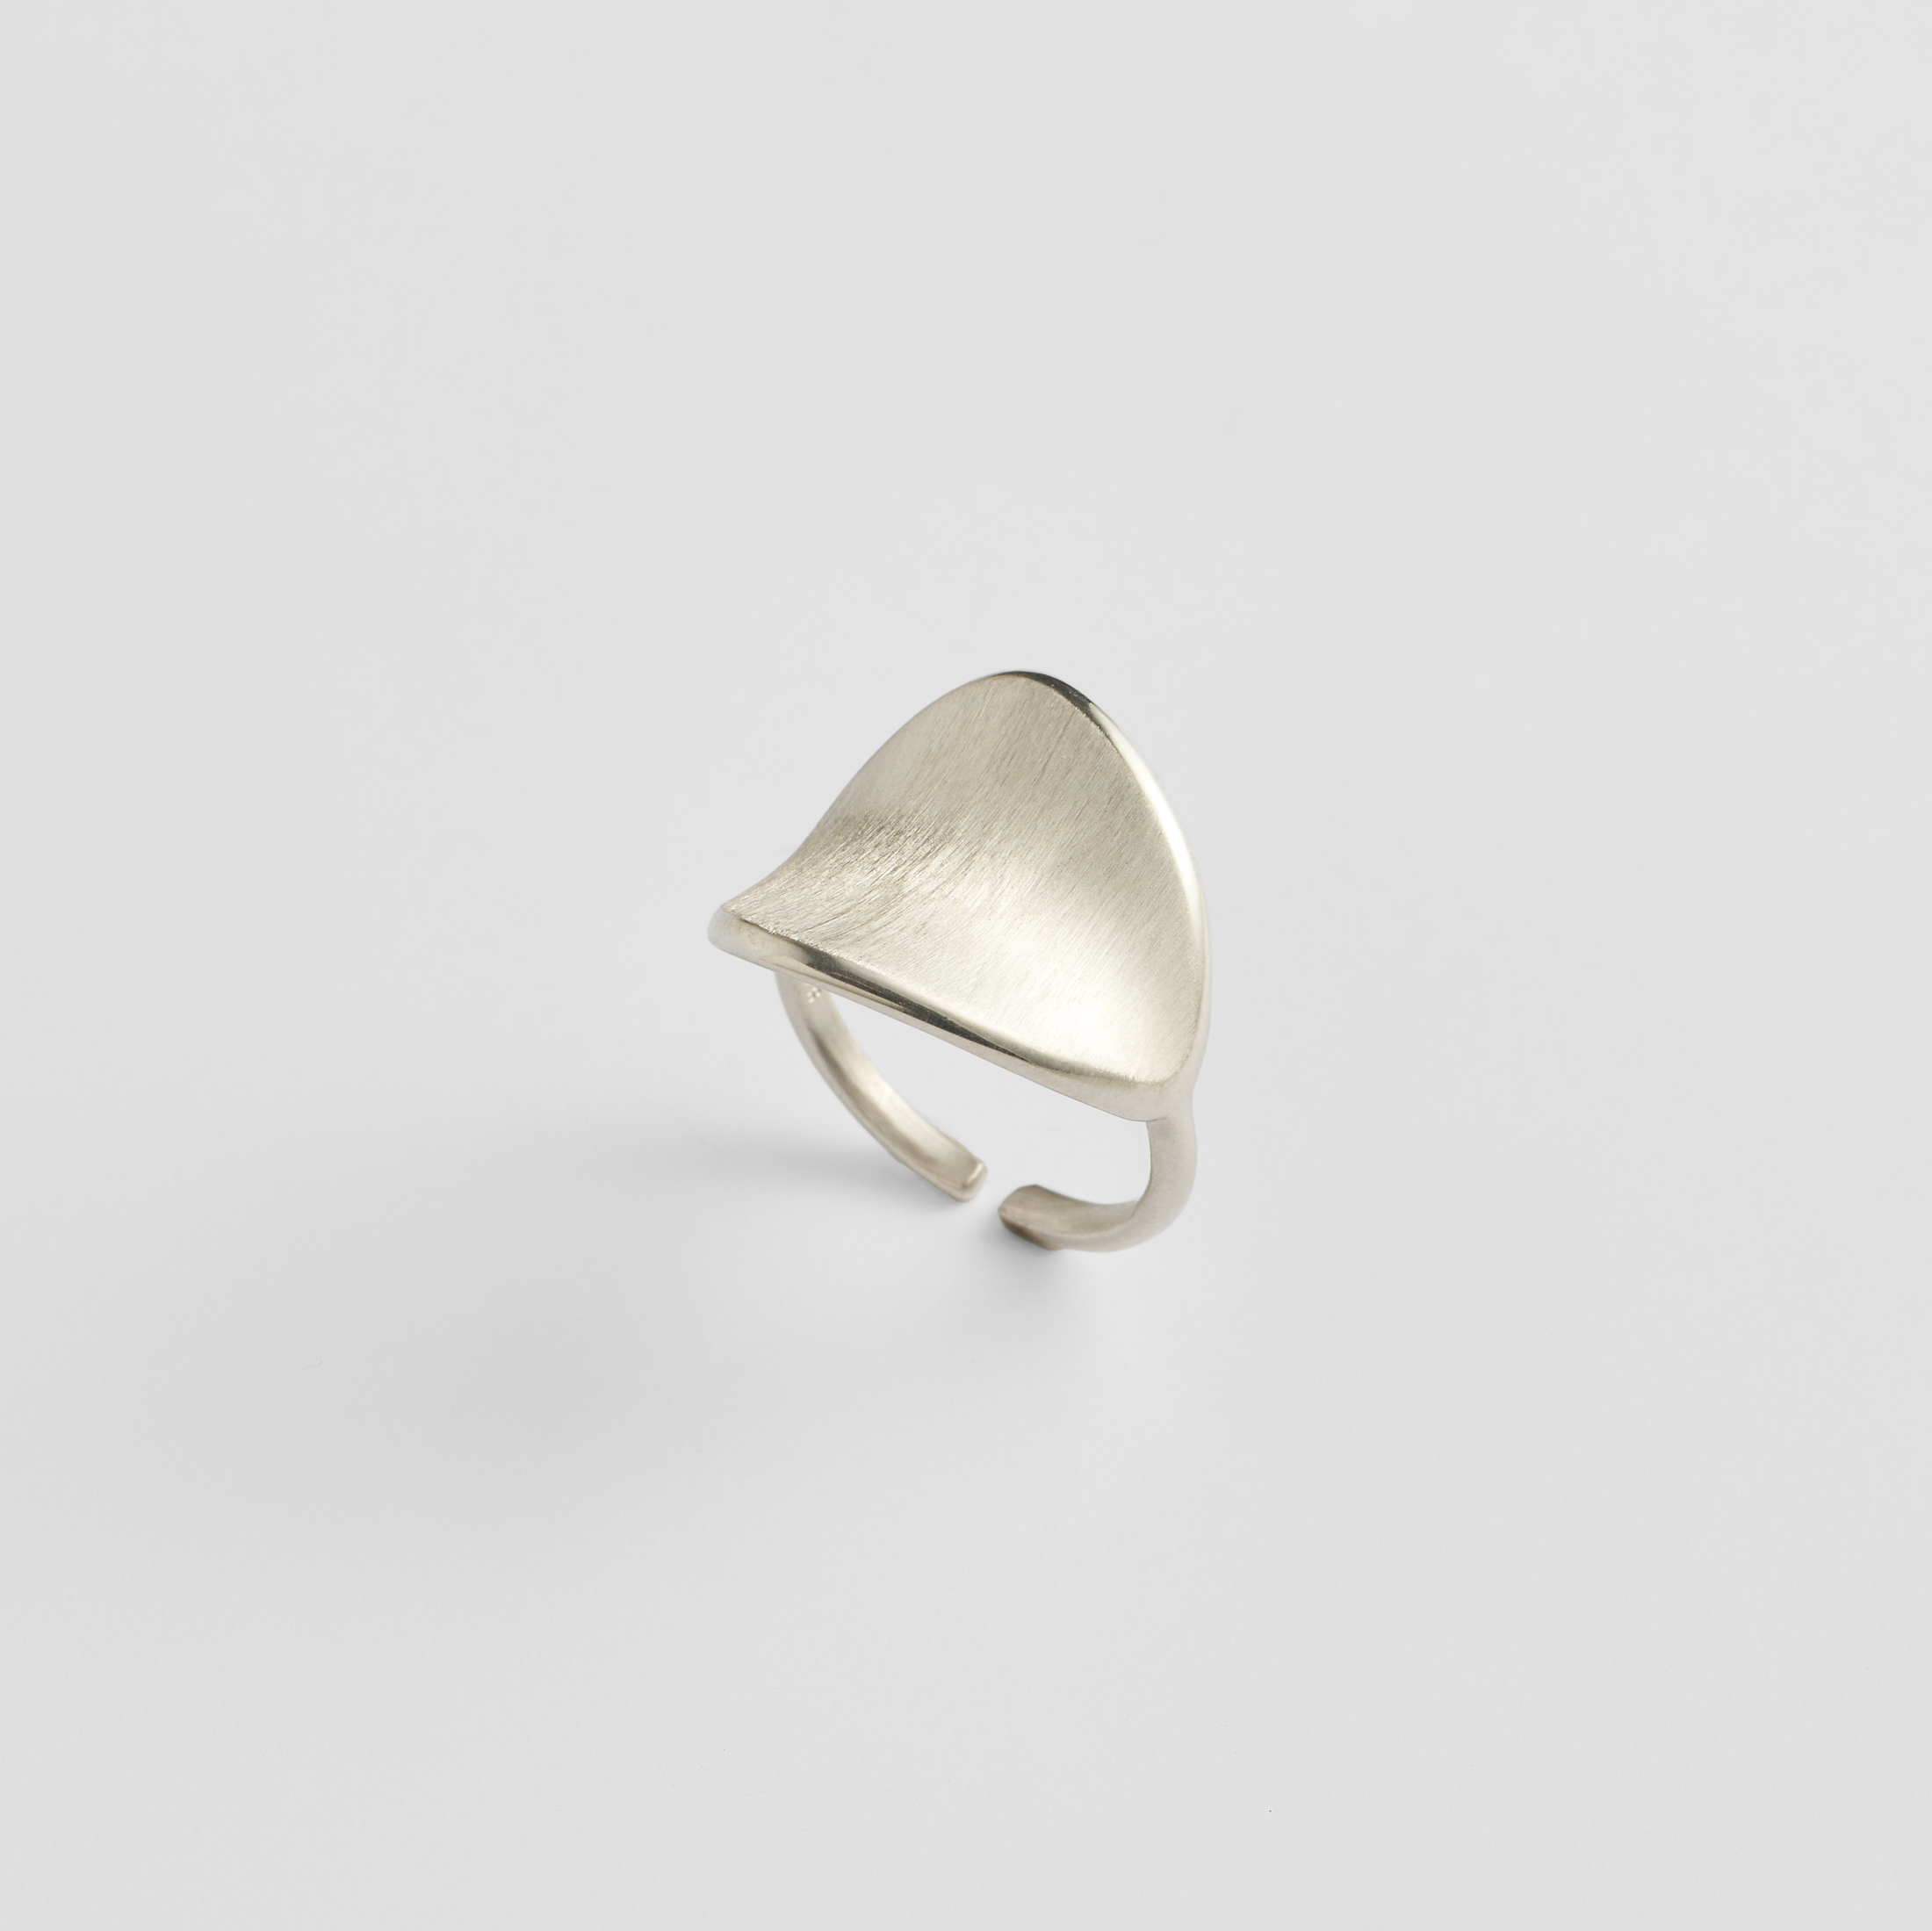 Slide Ring Silver - A special ring with a matte surface that reminds us of a vintage inspired piece from another era. Its silver color adds a modern tone, uniquely combining the classic with the contemporary element.

<strong>Extra tip:</strong> It features an open back to adjust the size.